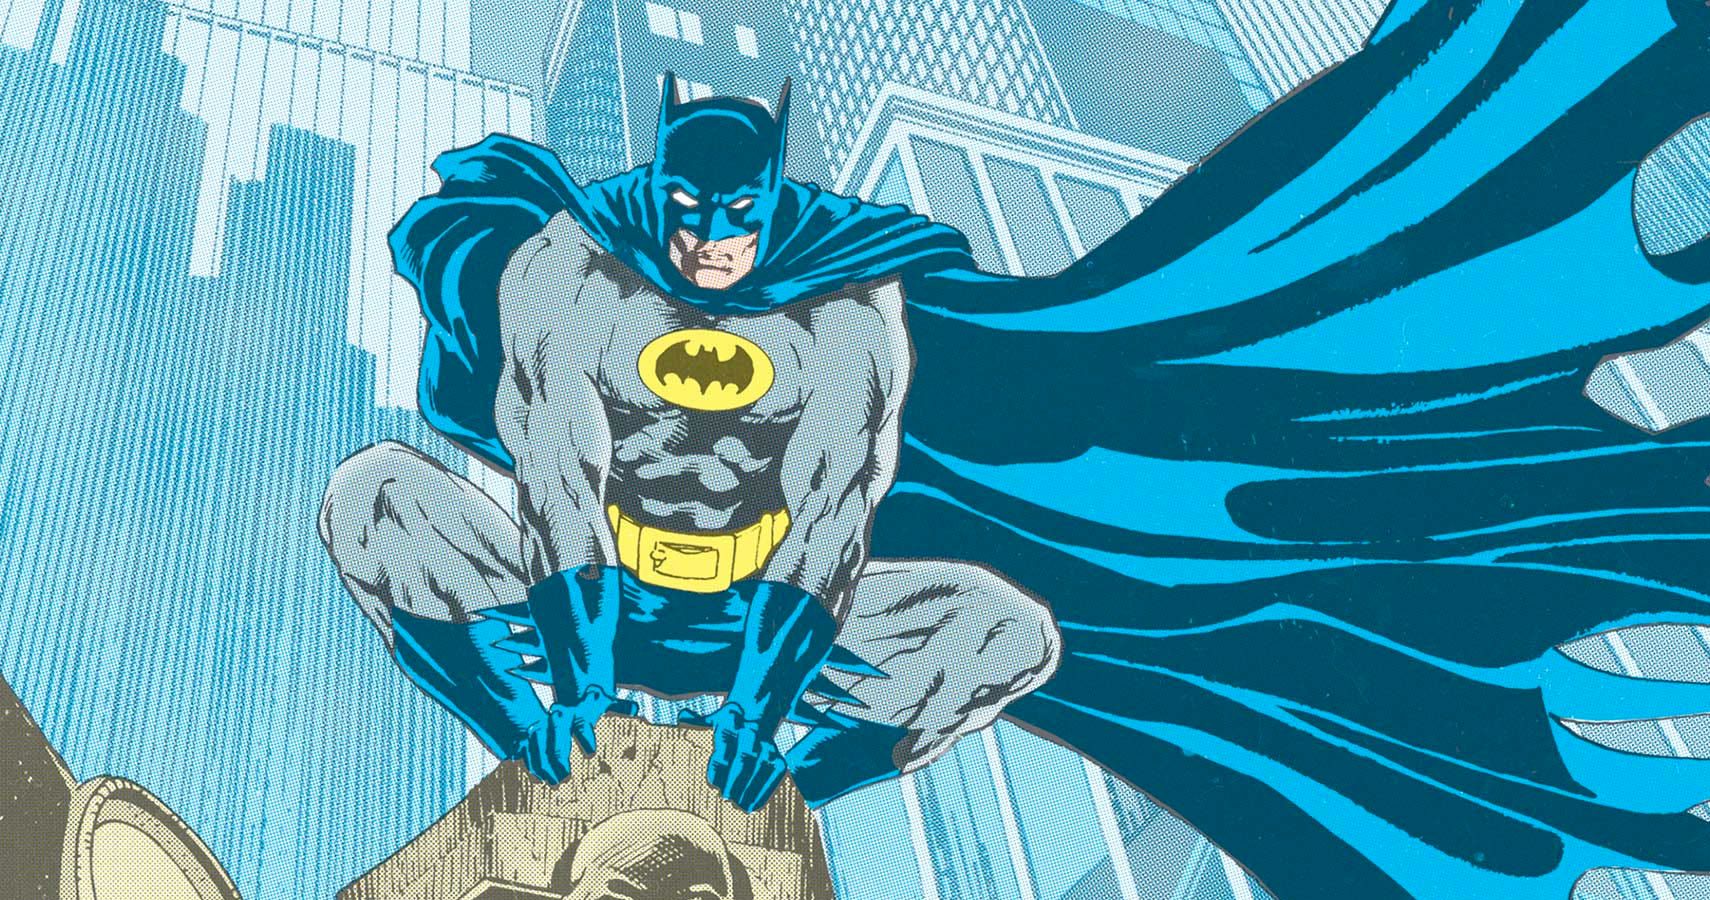 10 Things Batman's Cape & Cowl Can Do (That Even Die-Hard Fans Didn't Know)